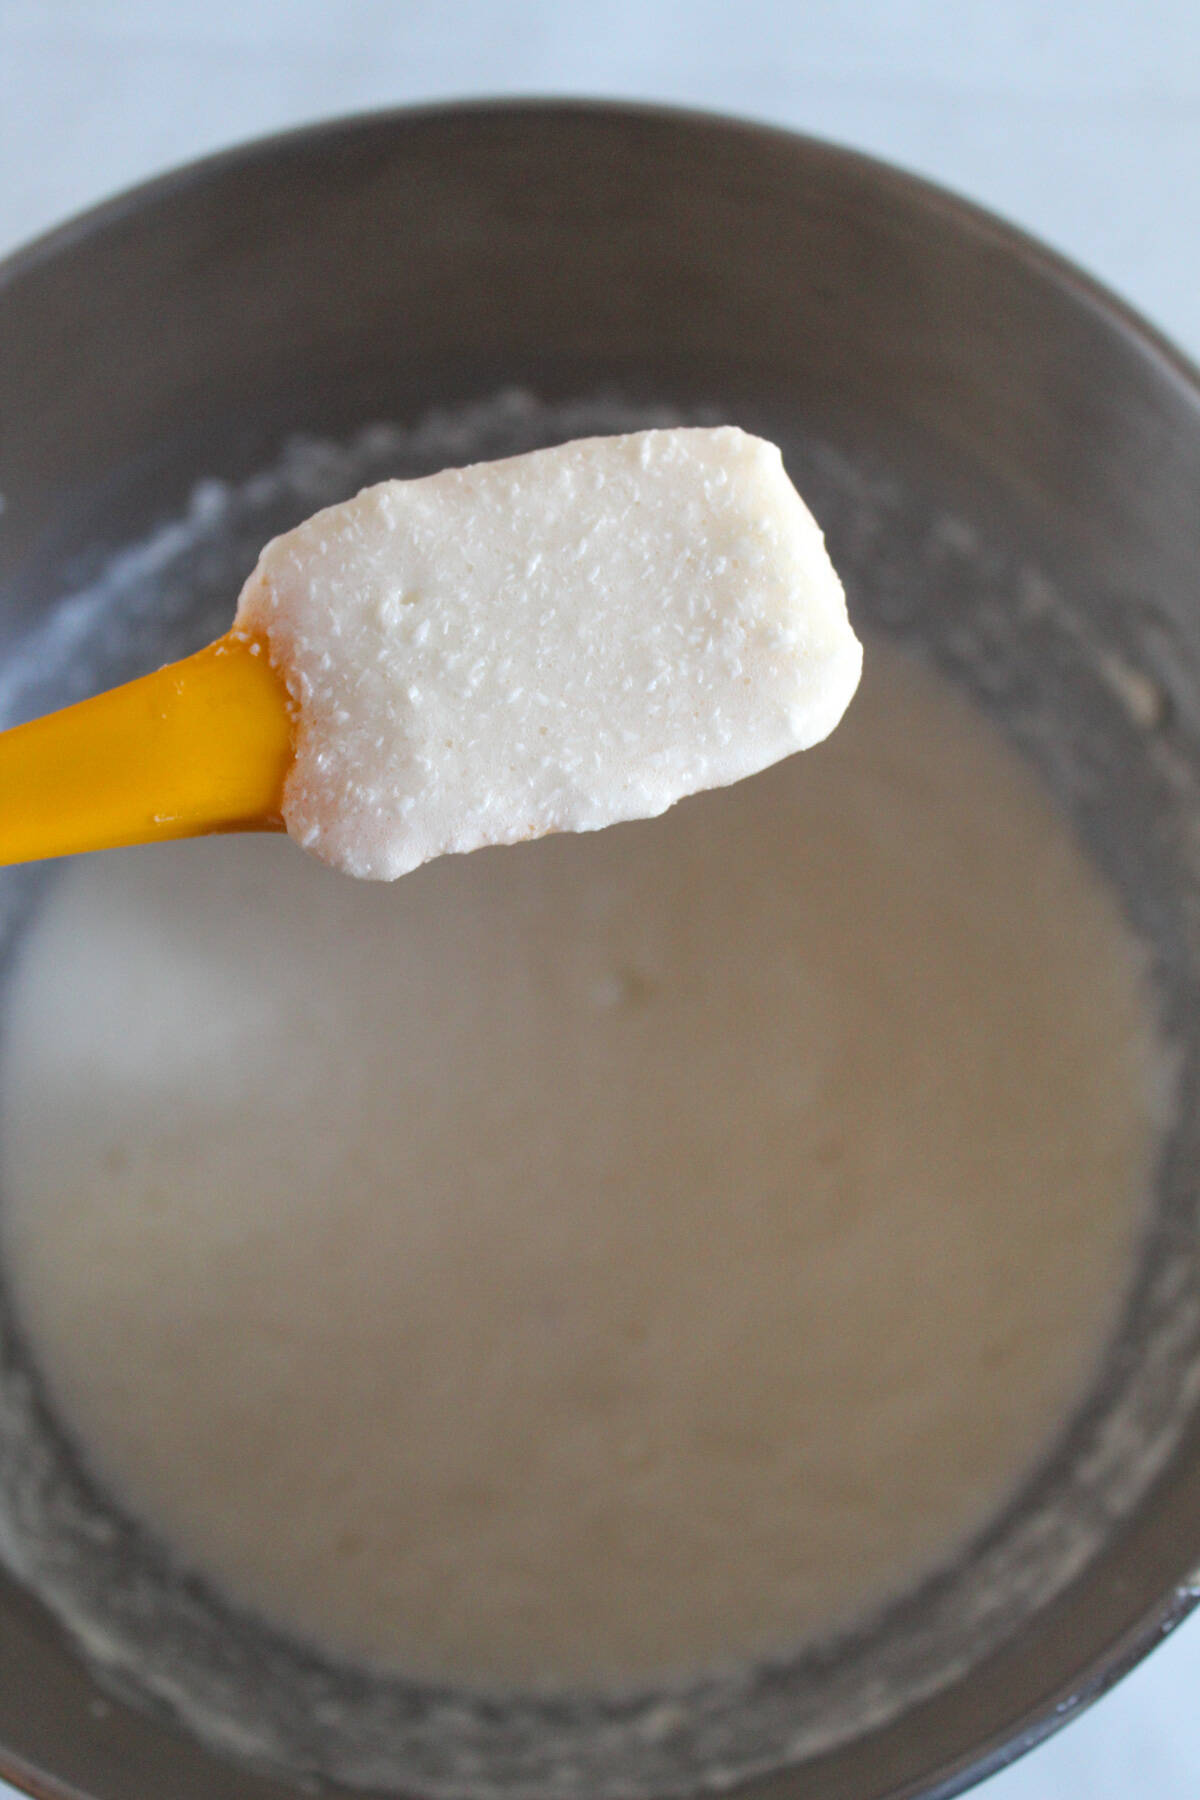 beat wet ingredients until smooth and creamy for baking gluten free cake.